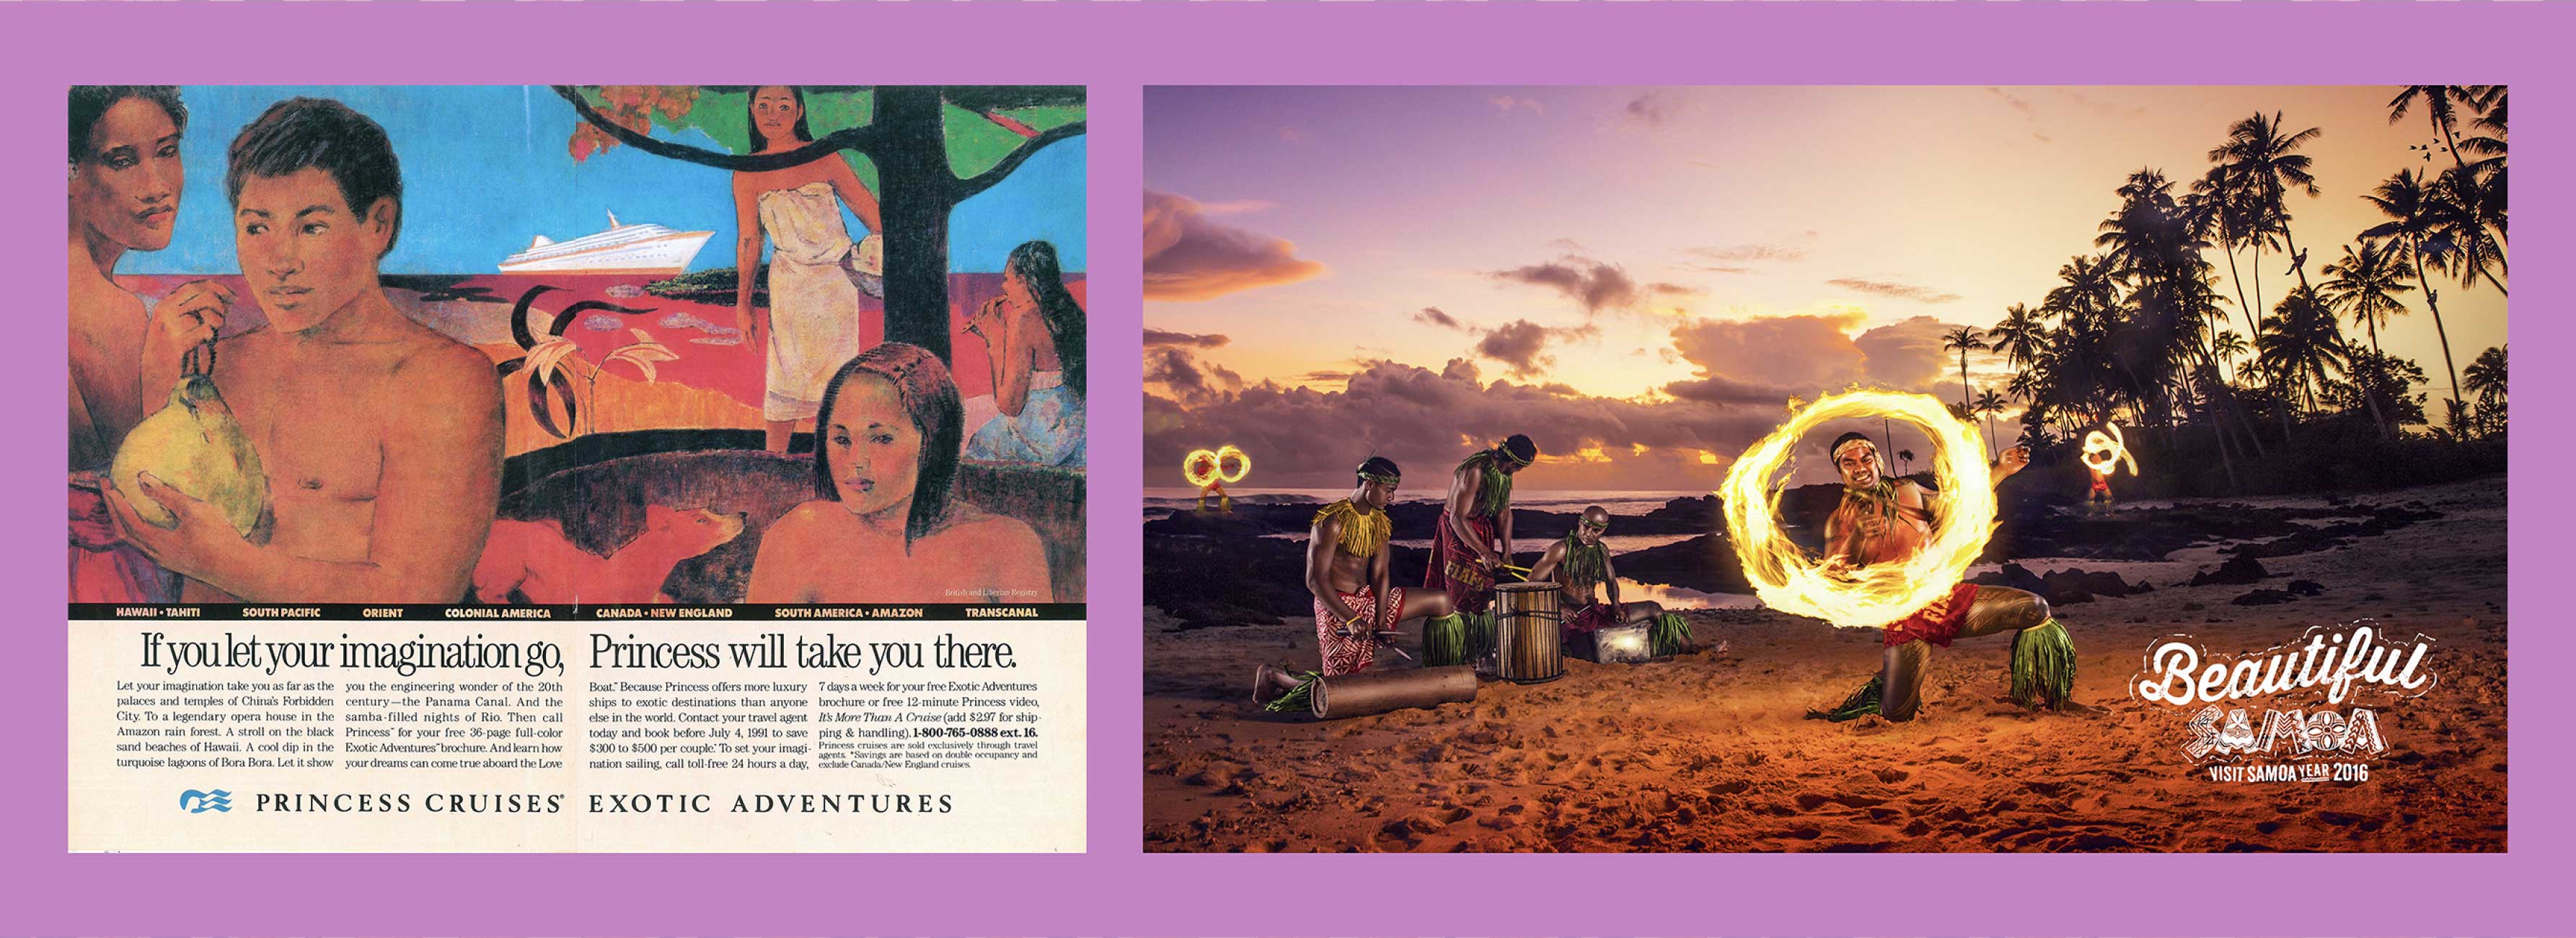 Gauguin and tourism imagery in the Moana